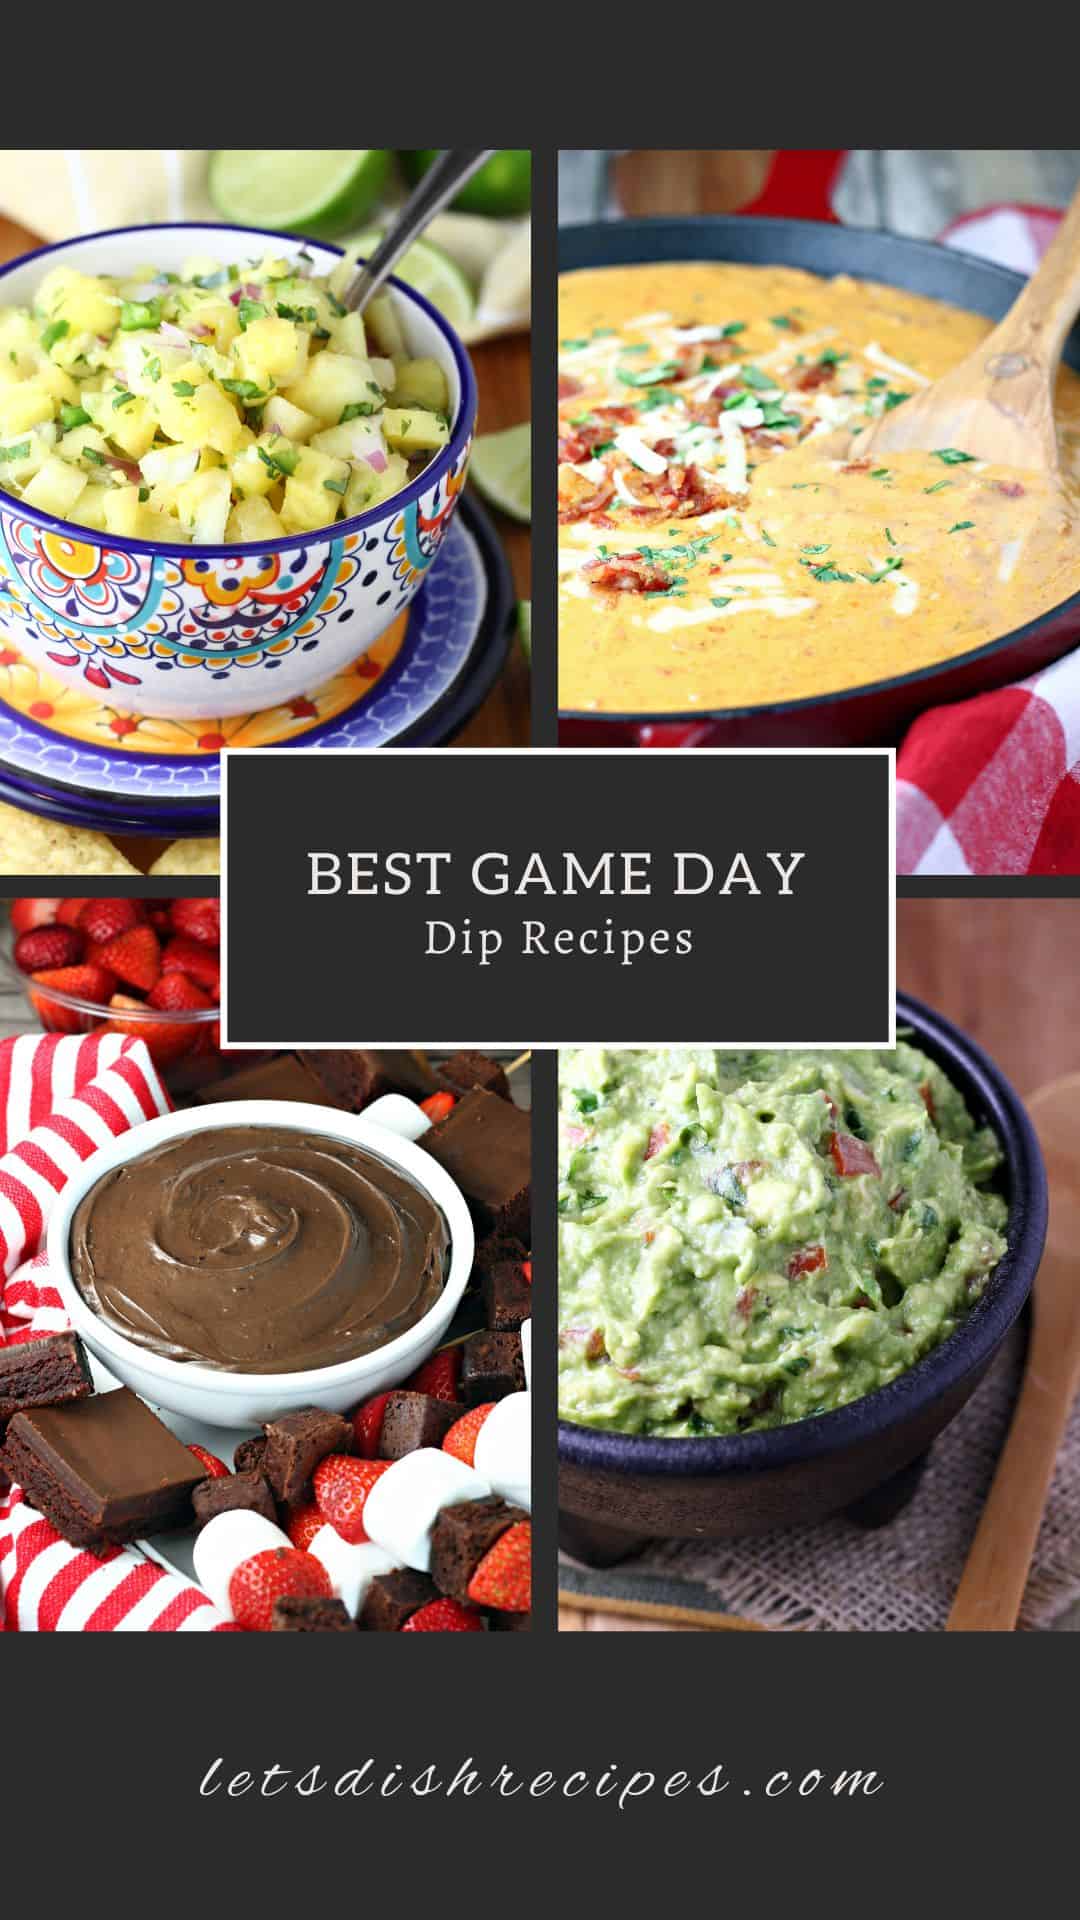 Cold dips for Tailgating - Game Day Eats